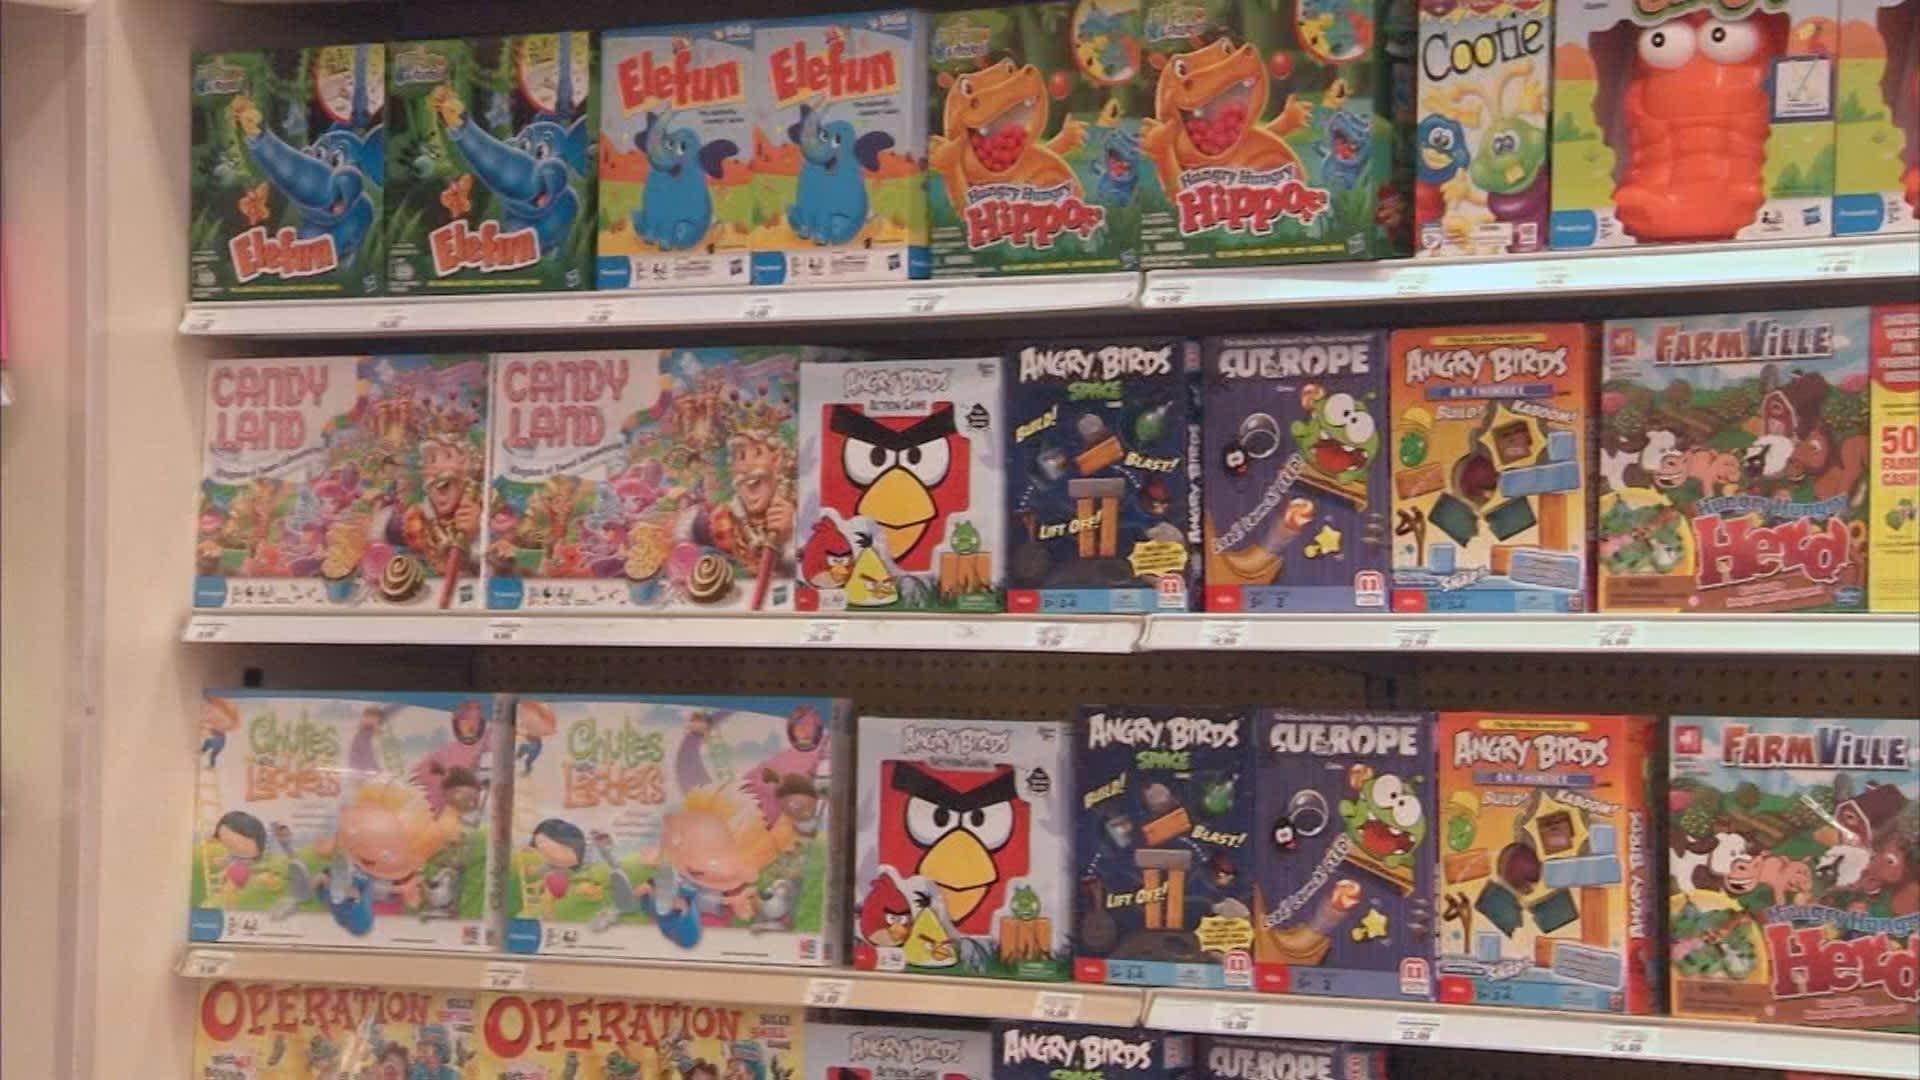 operation game toys r us